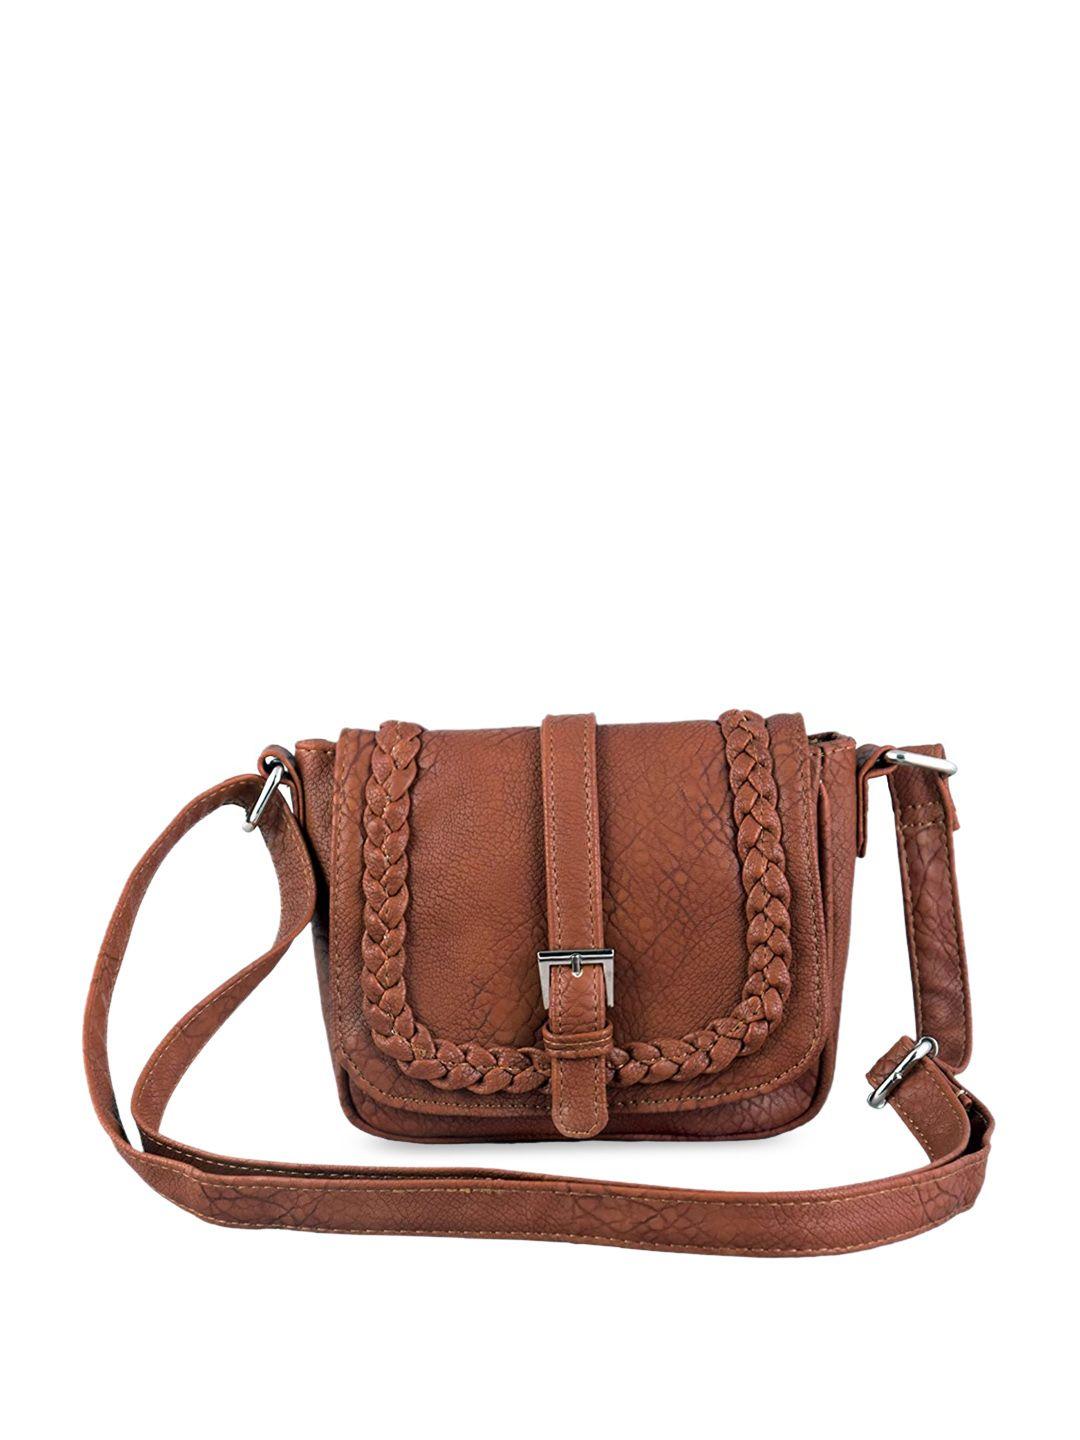 mast & harbour rust-coloured textured structured sling bag